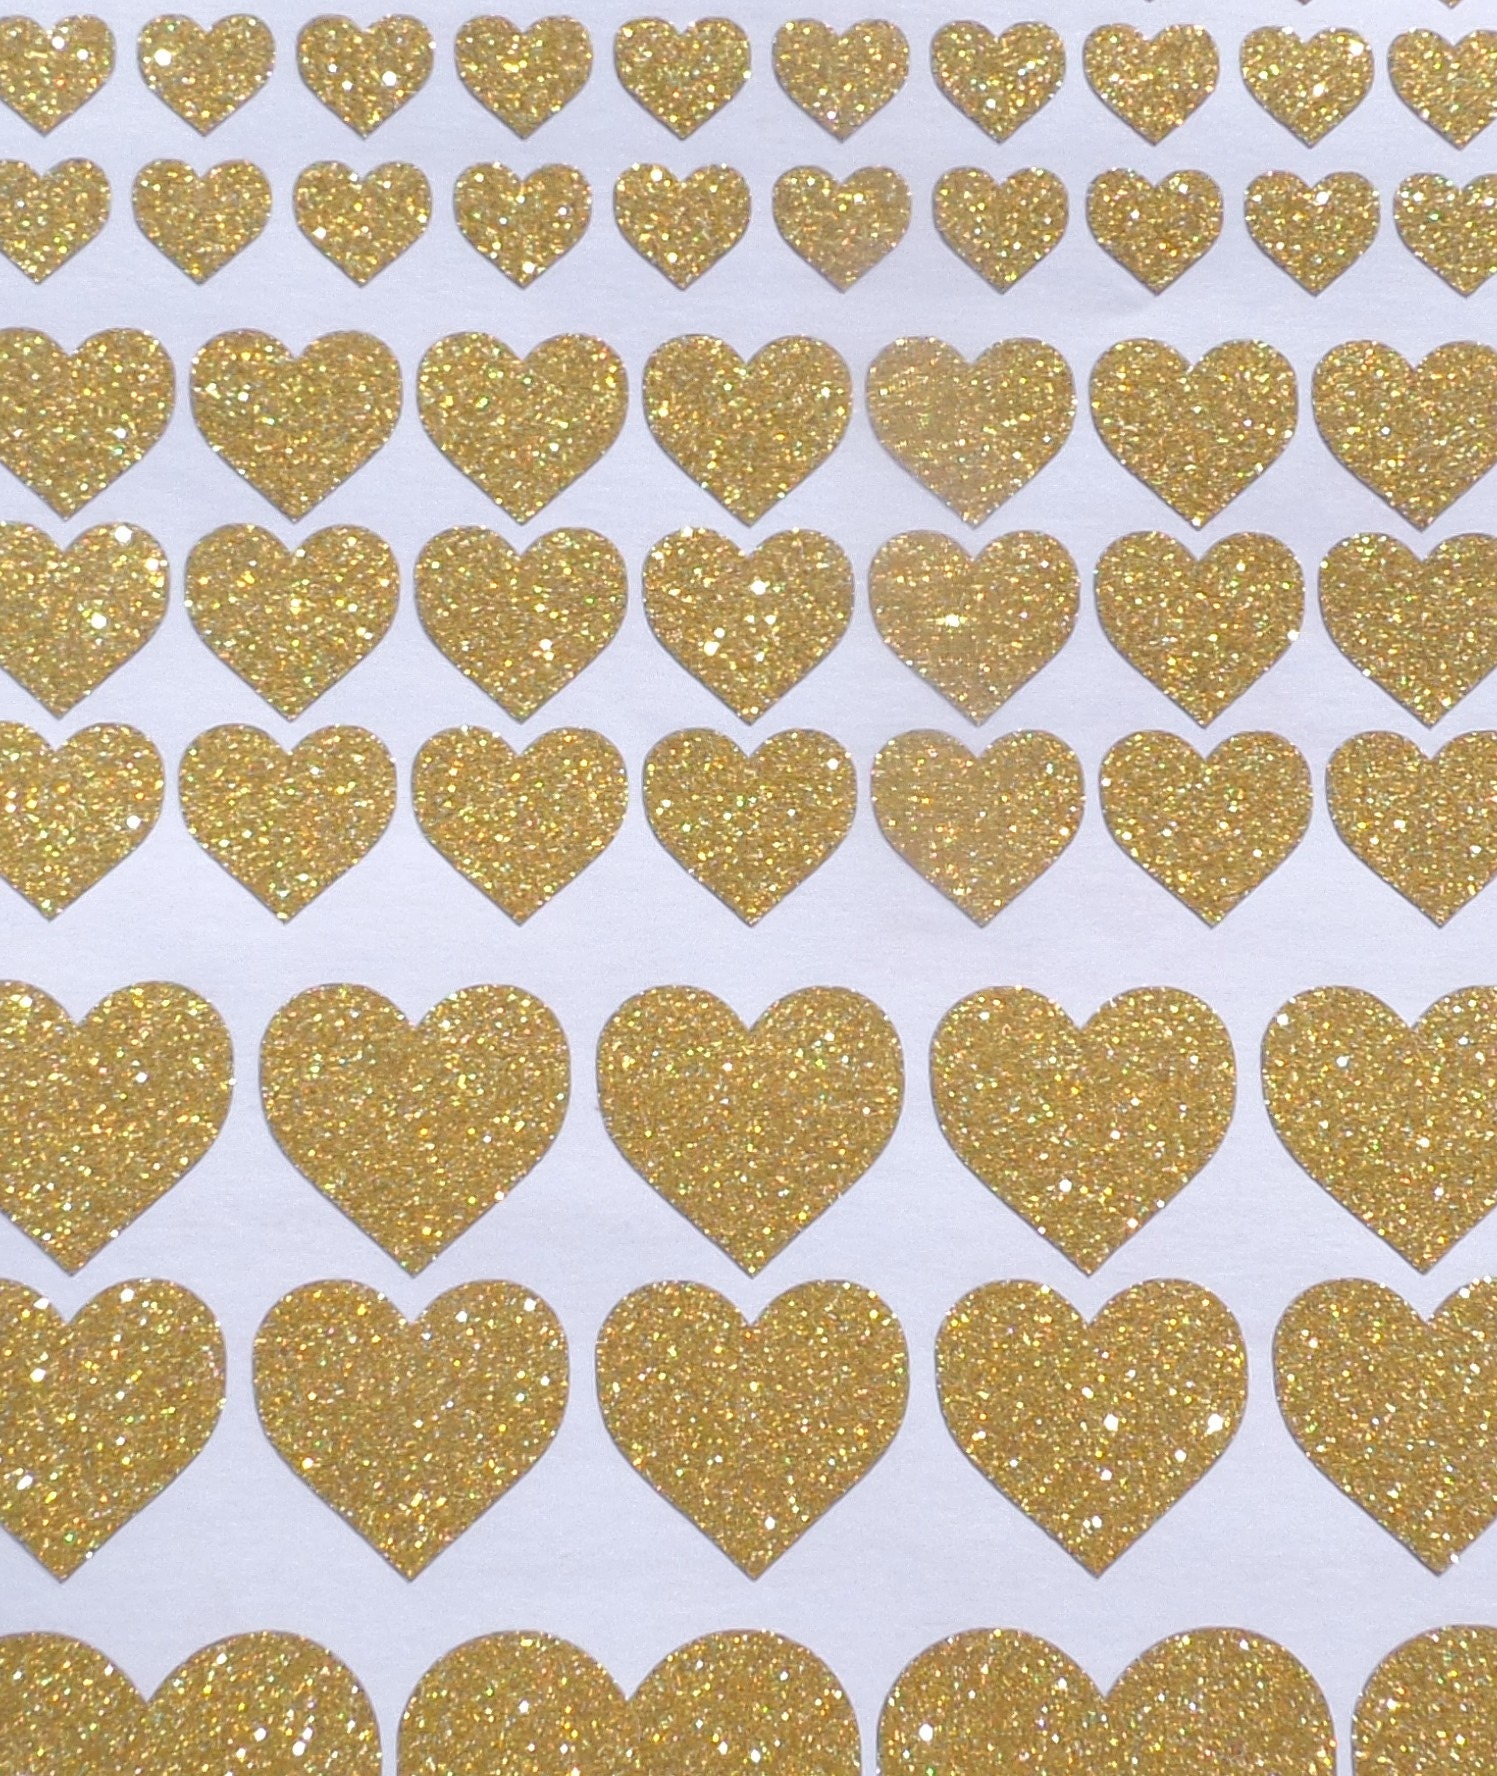 Dtydtpe Room Decor Home Decor Heart Shaped Foam Sticker Decorative Valentine's Day Heart Stickers Various Colors Self Adhesive Foam Heart Shaped Craft